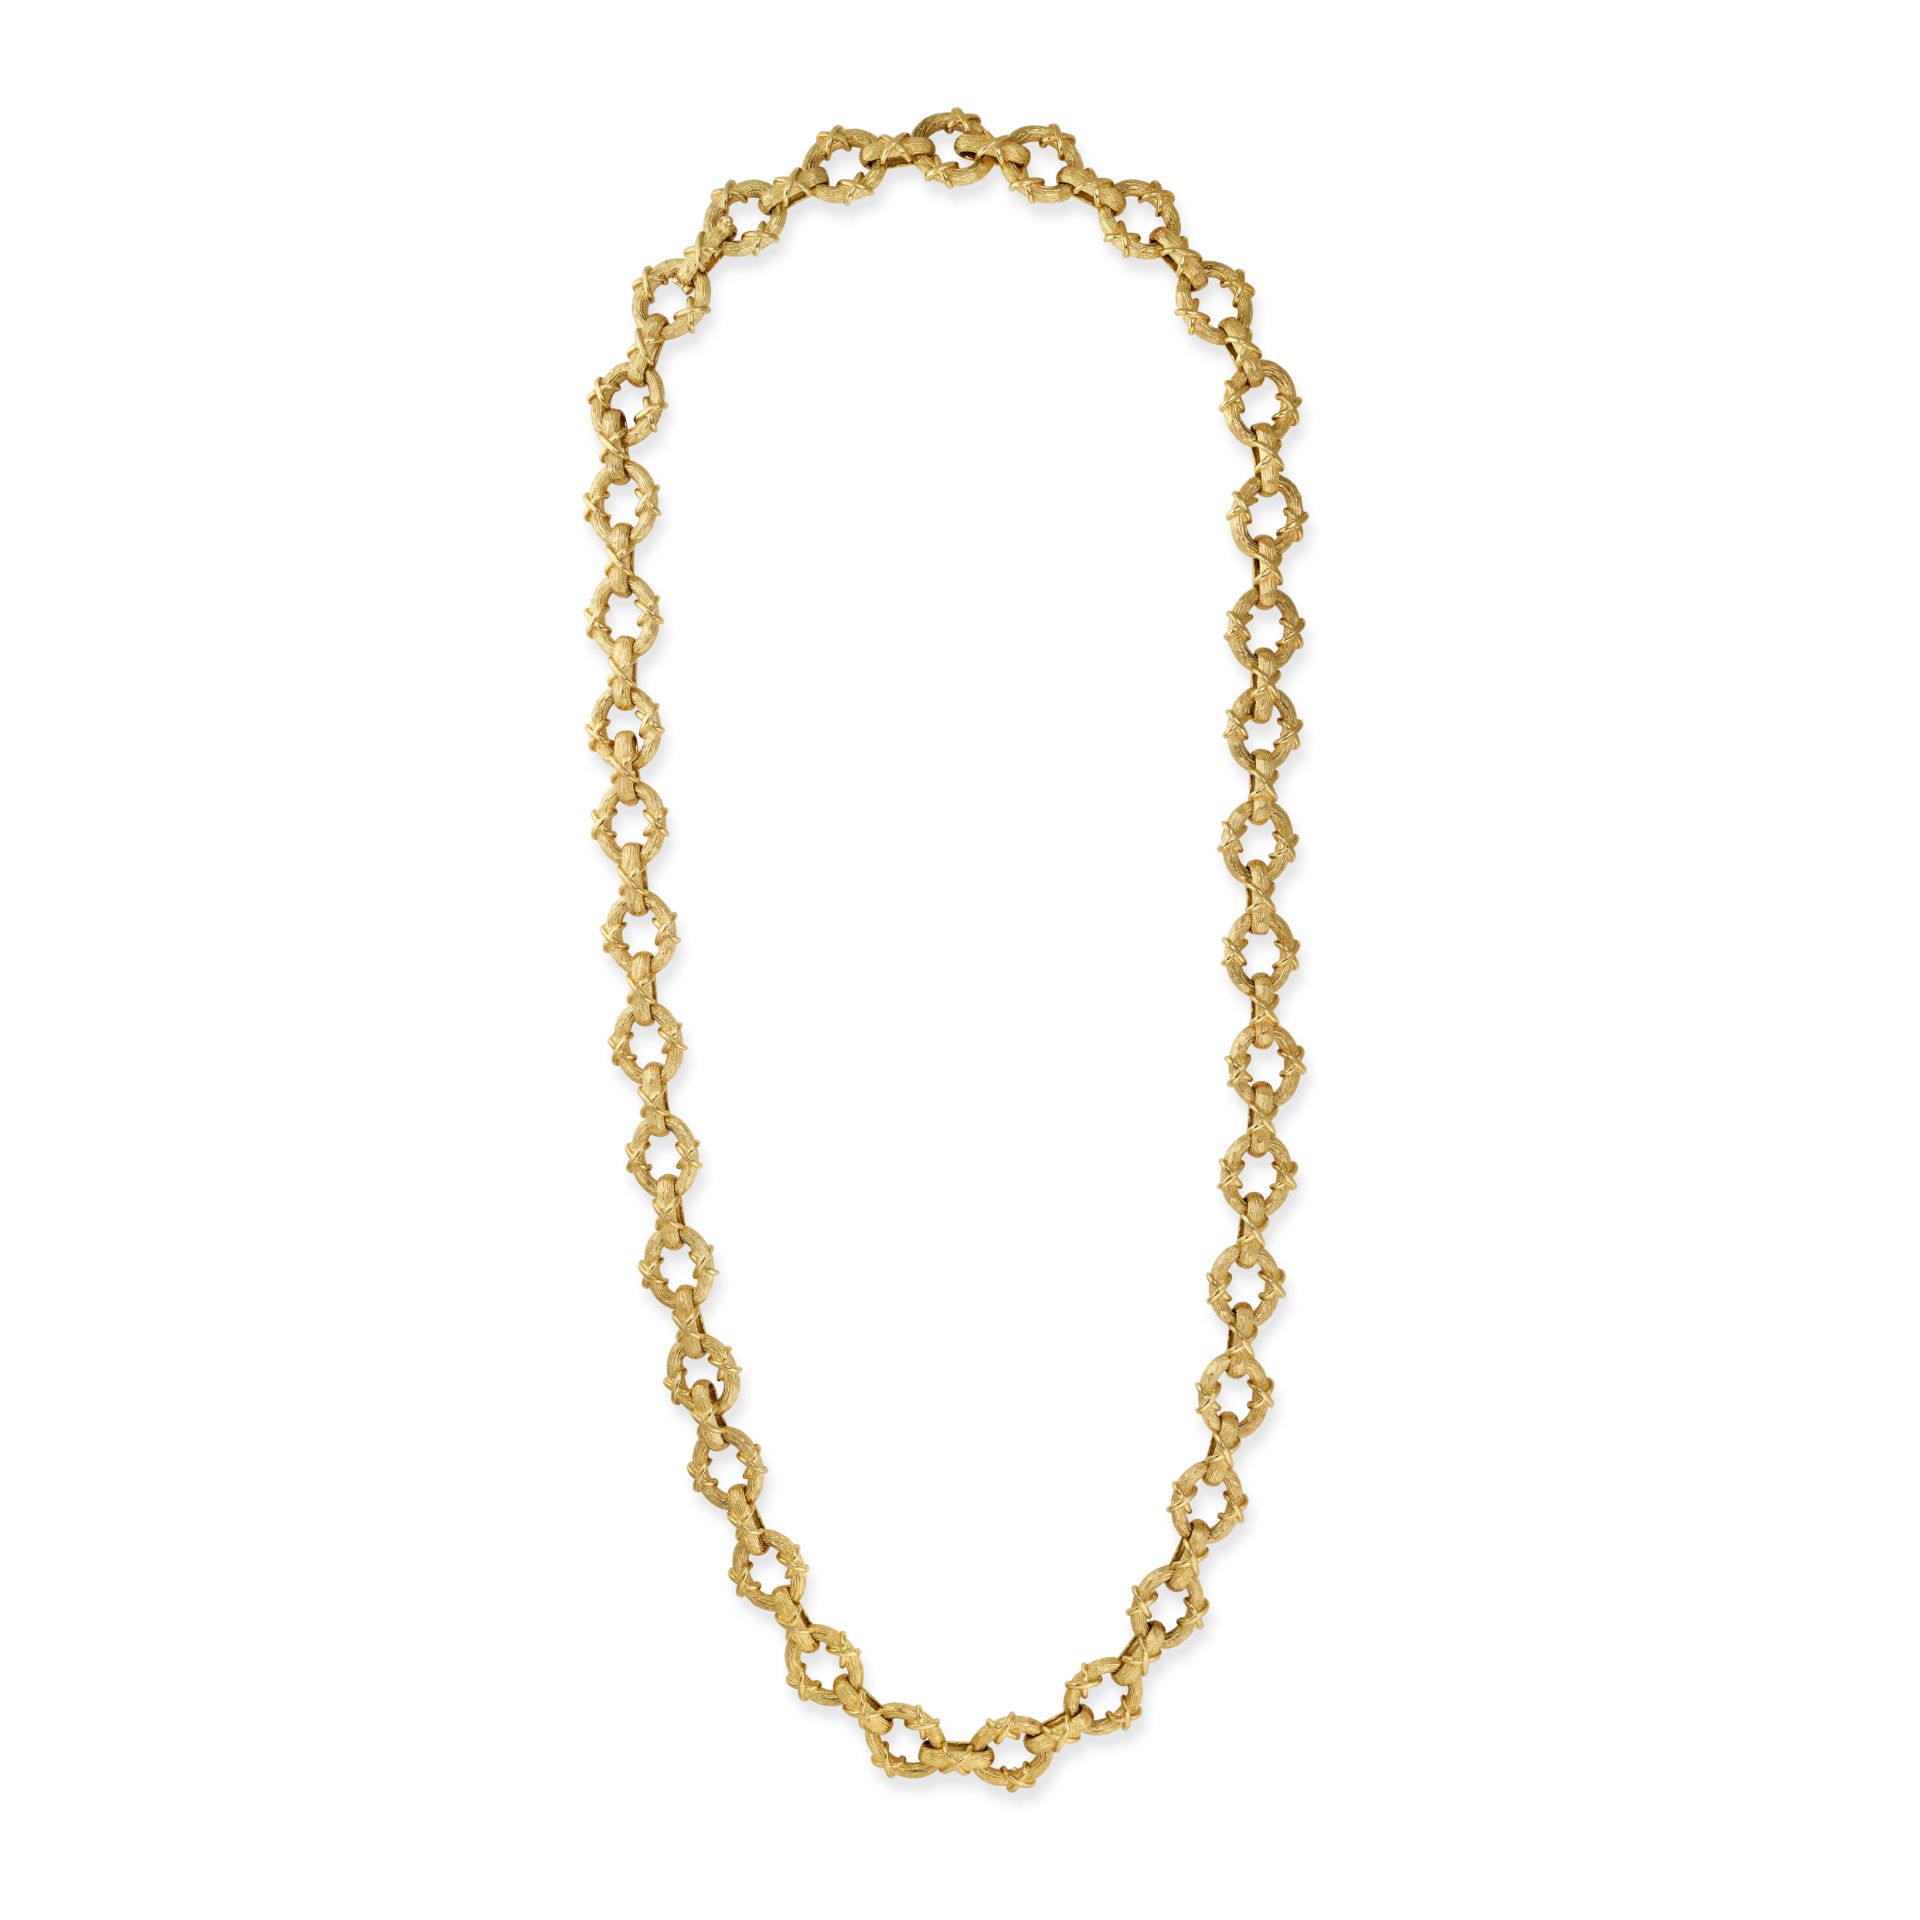 JEAN SCHLUMBERGER FOR TIFFANY & CO., A GOLD NECKLACE comprising a row of open circular links acce...